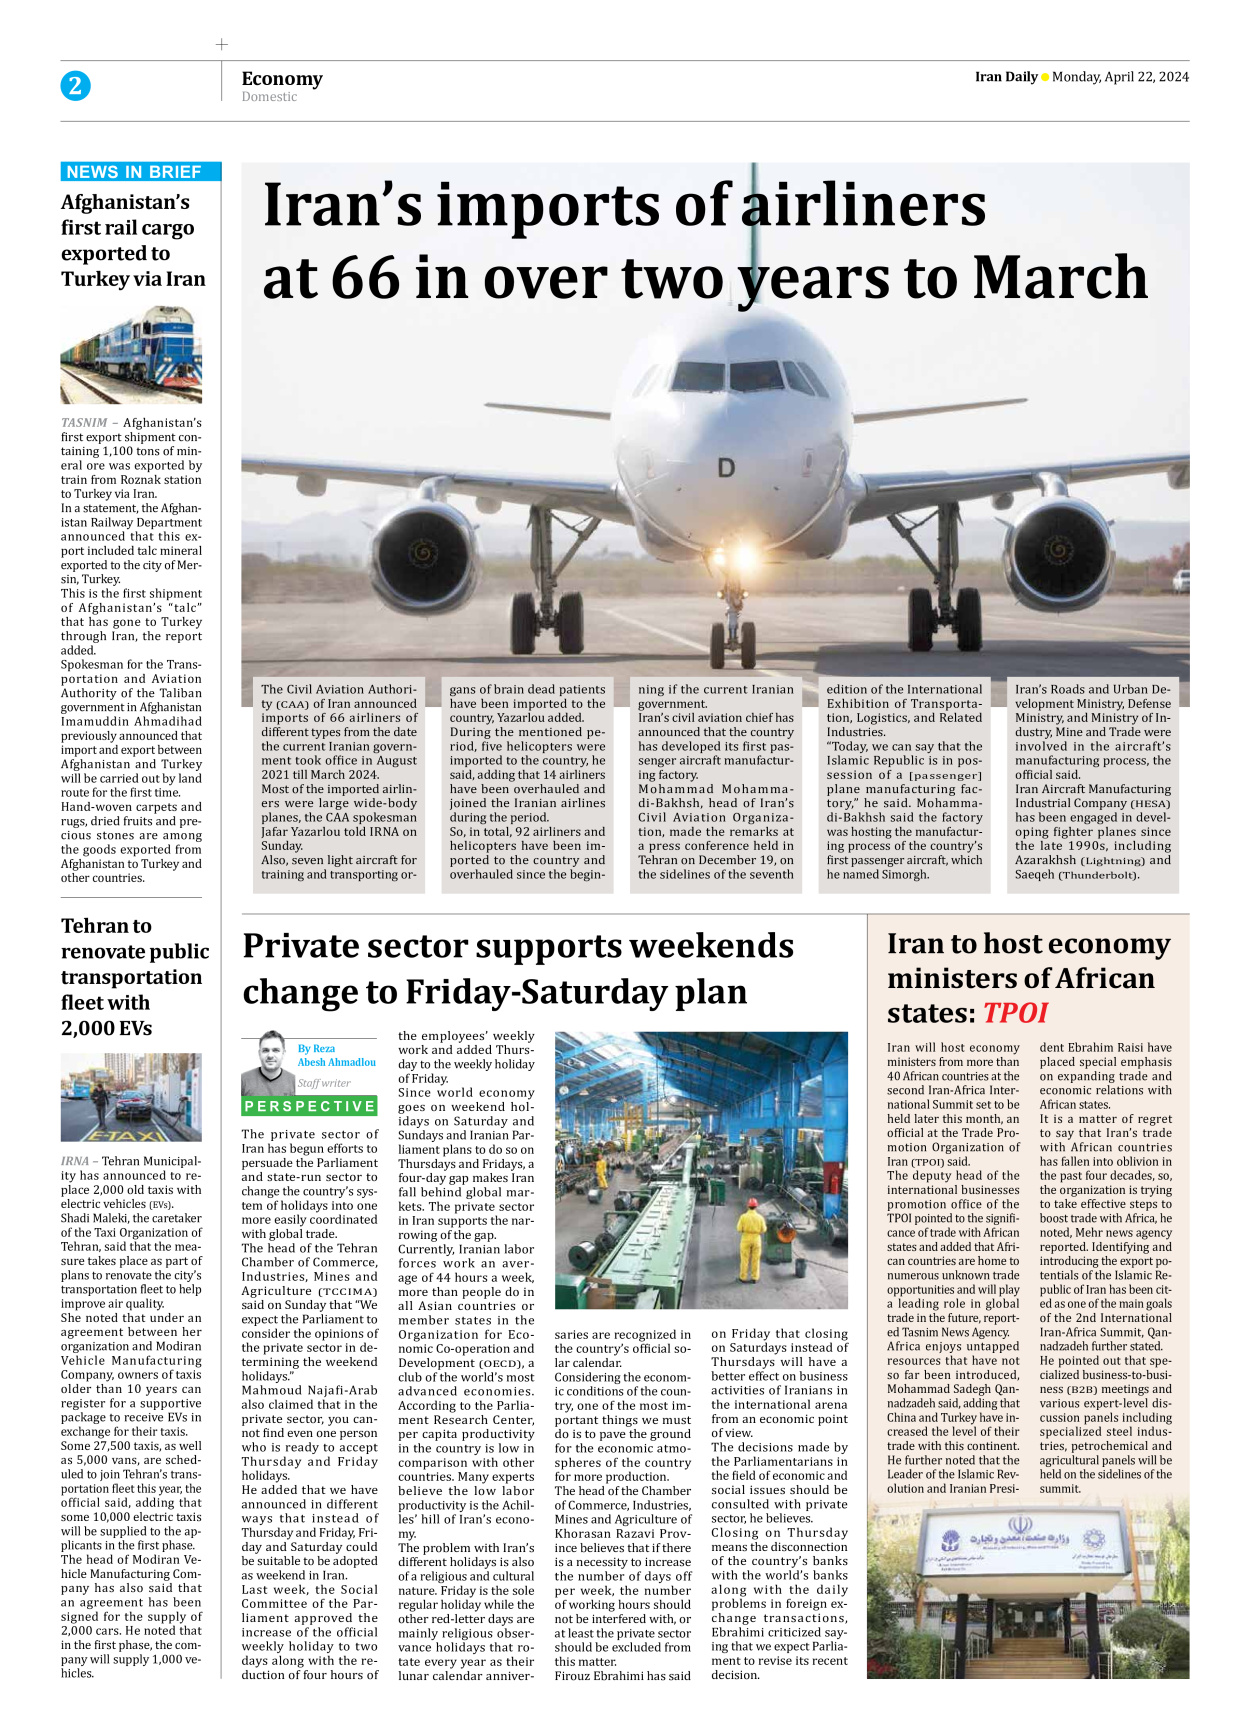 Iran Daily - Number Seven Thousand Five Hundred and Thirty Nine - 22 April 2024 - Page 2